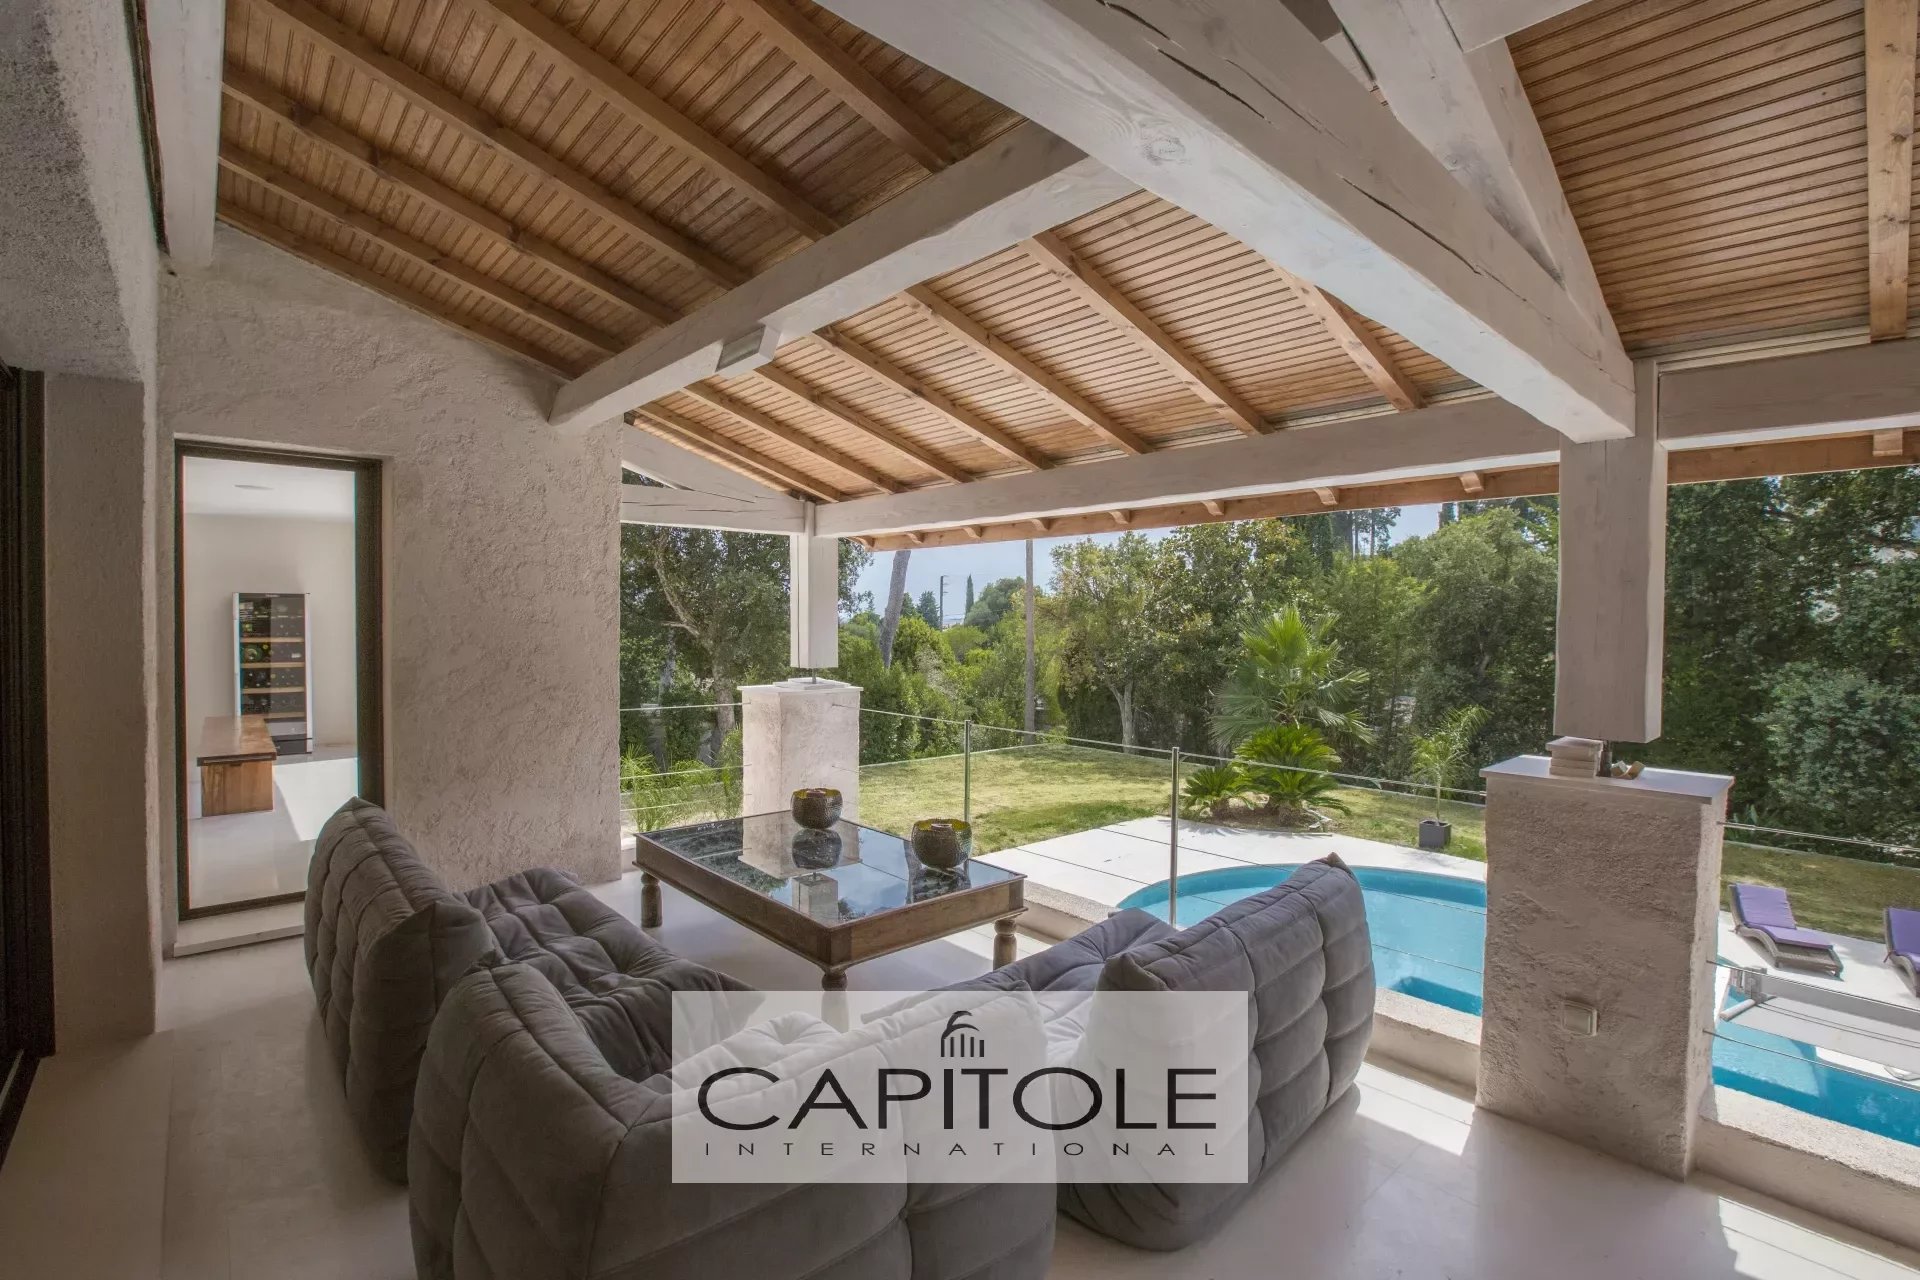 Antibes for sale  5/6 bedrooms spacious modern villa of 343 sqm with pool